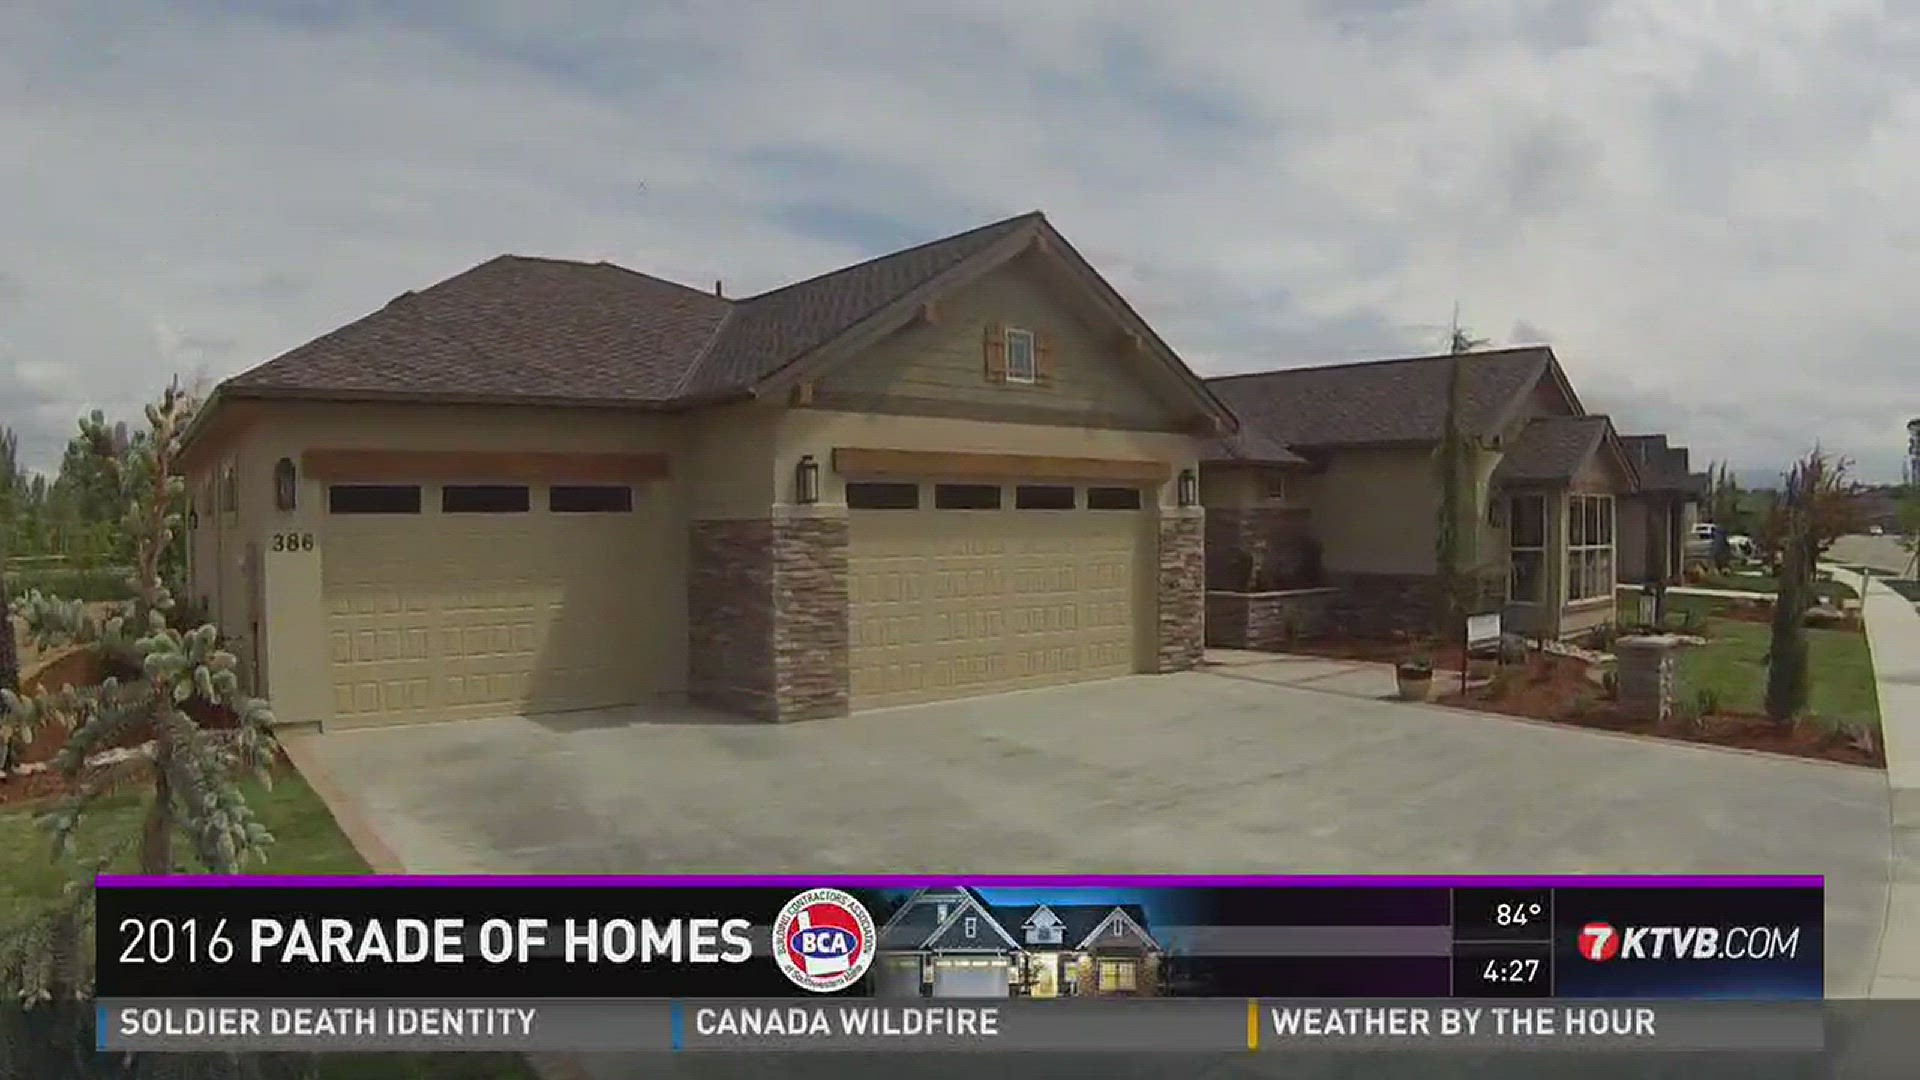 We took a tour of one of the homes in the Lakemoor subdivision in Eagle.